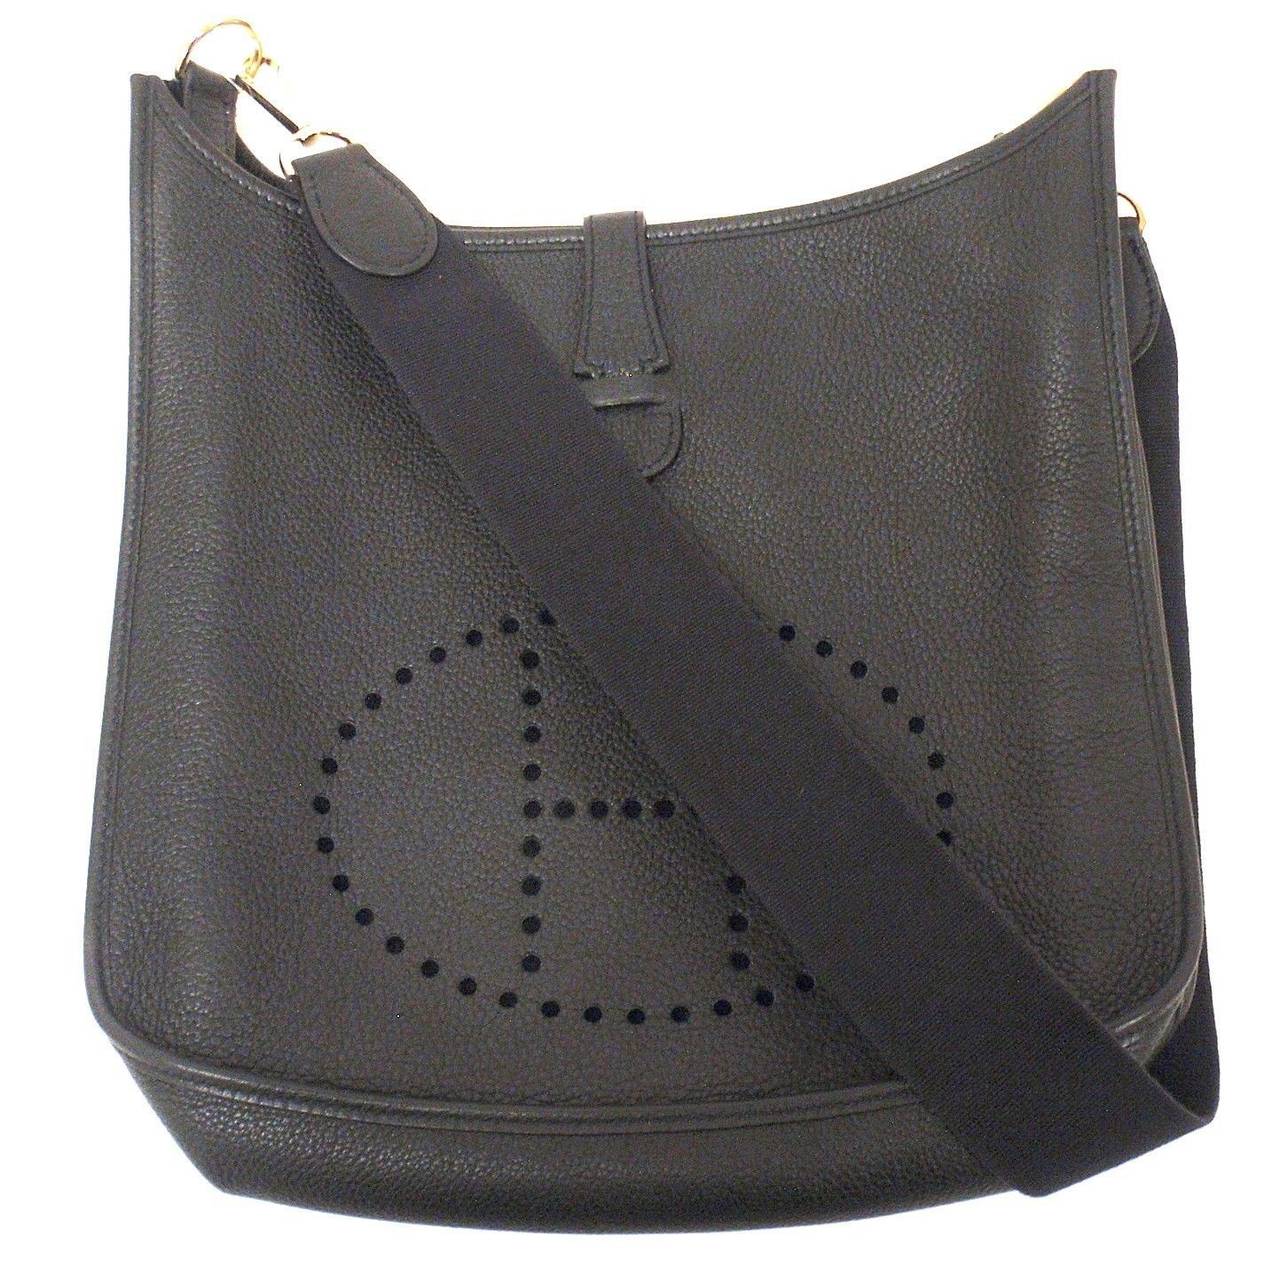 HERMES EVELYNE GM BLACK CLEMENCE LEATHER GHW SHOULDER BAG, 2003

 This bag is in EXCELLENT, NEAR MINT condition. Features sturdy but oh so soft and supple (and slouchy) black leather exterior with sueded leather interior.

Please note, color can